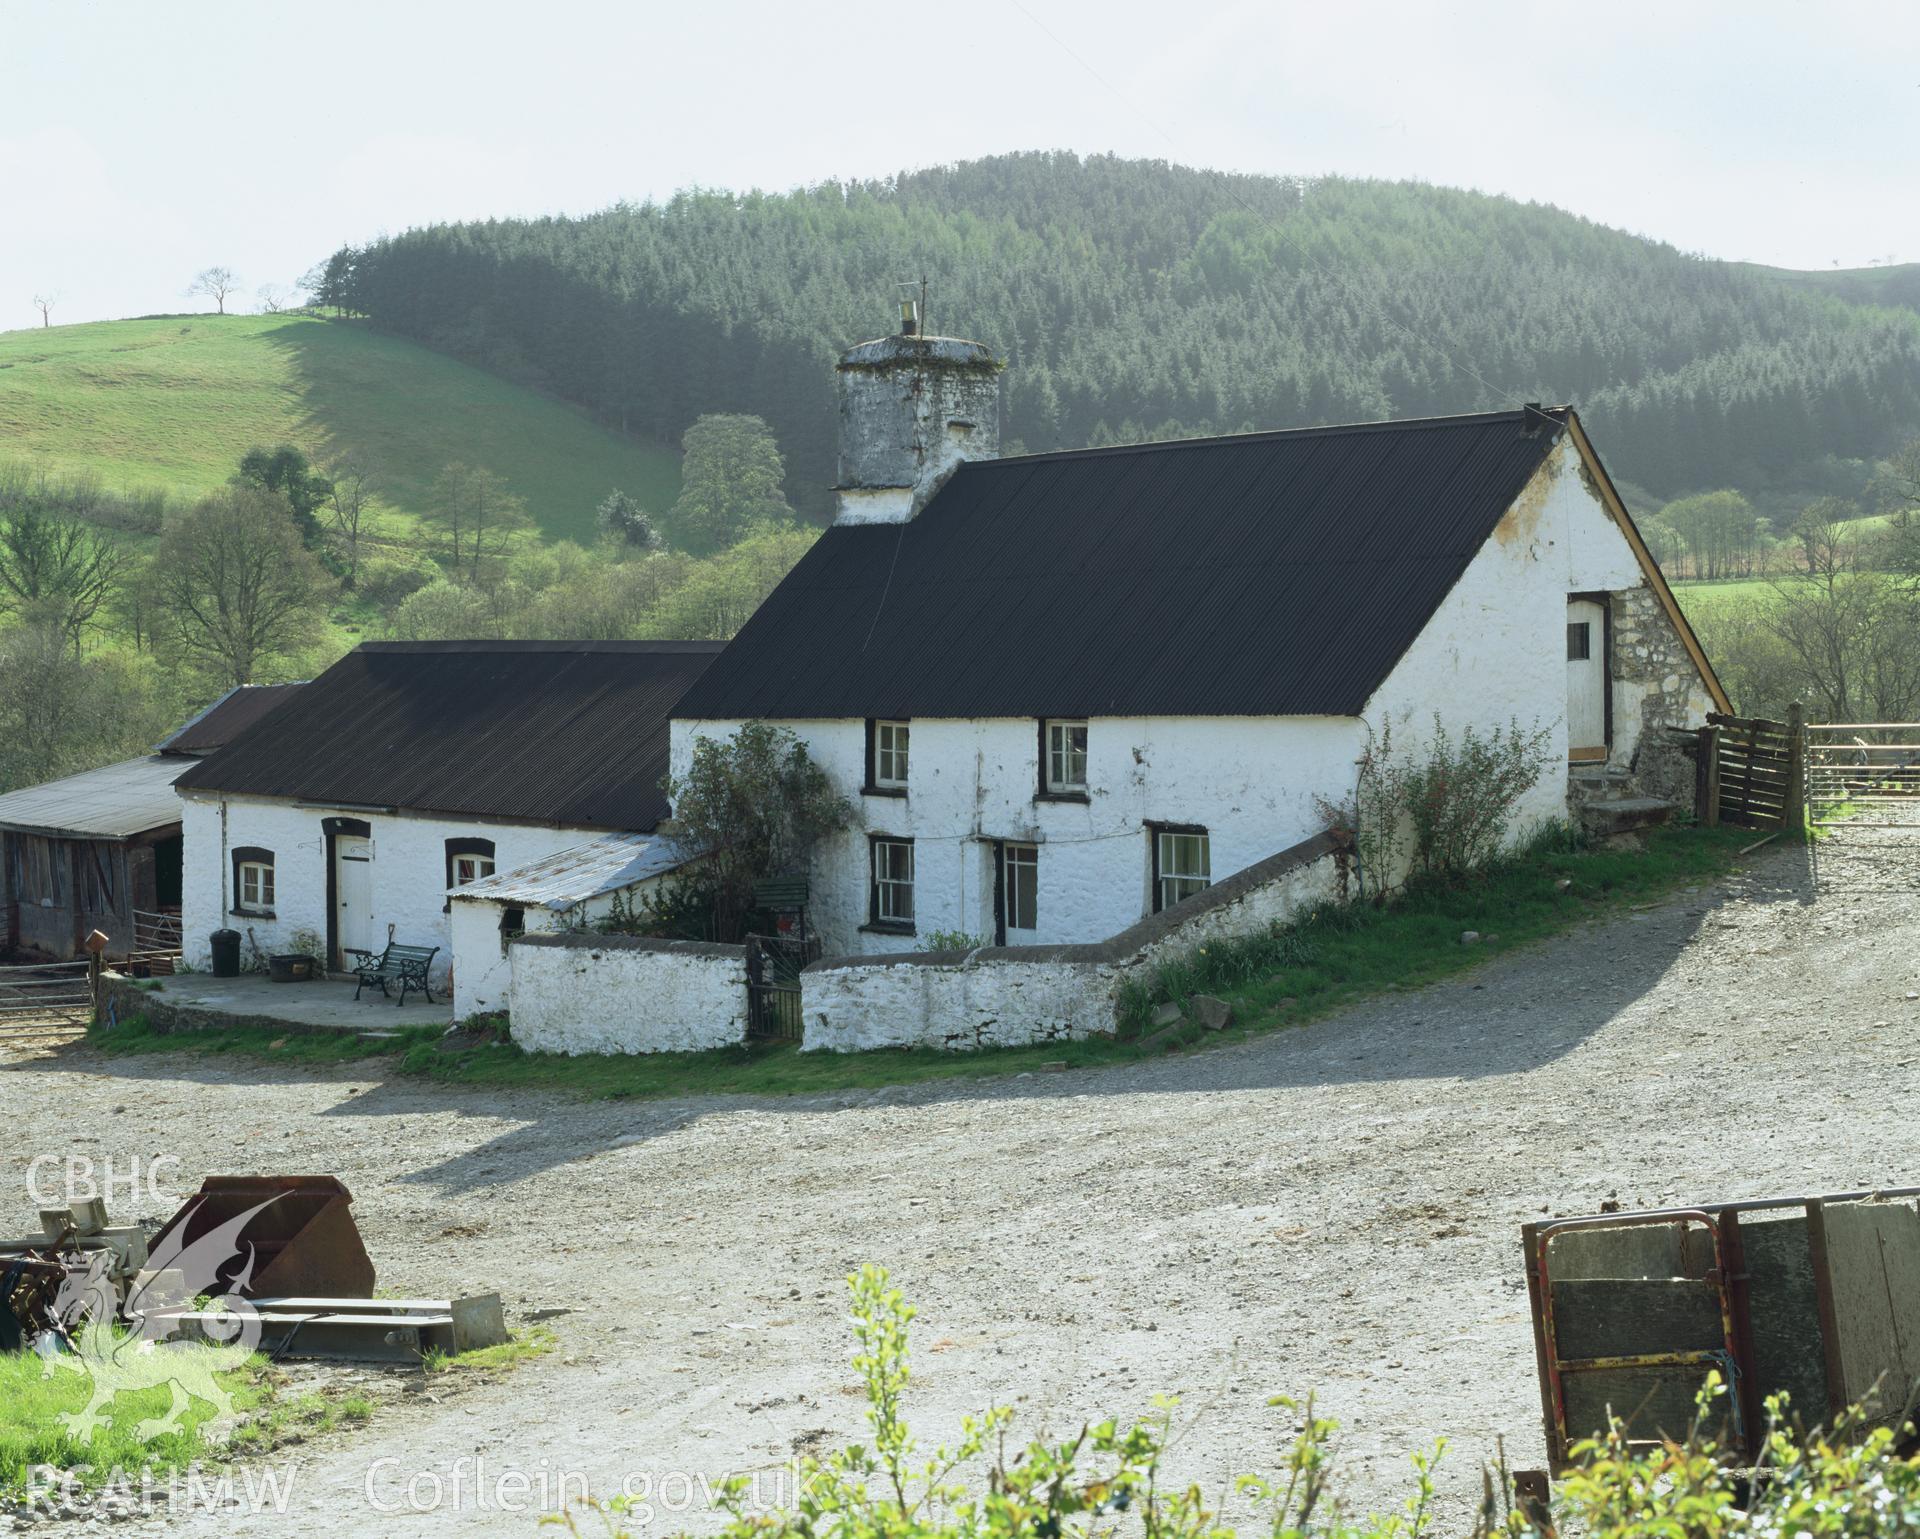 Colour transparency showing exterior view of Cwm-Eilath, Llansadwrn, produced by Iain Wright, June 2004.